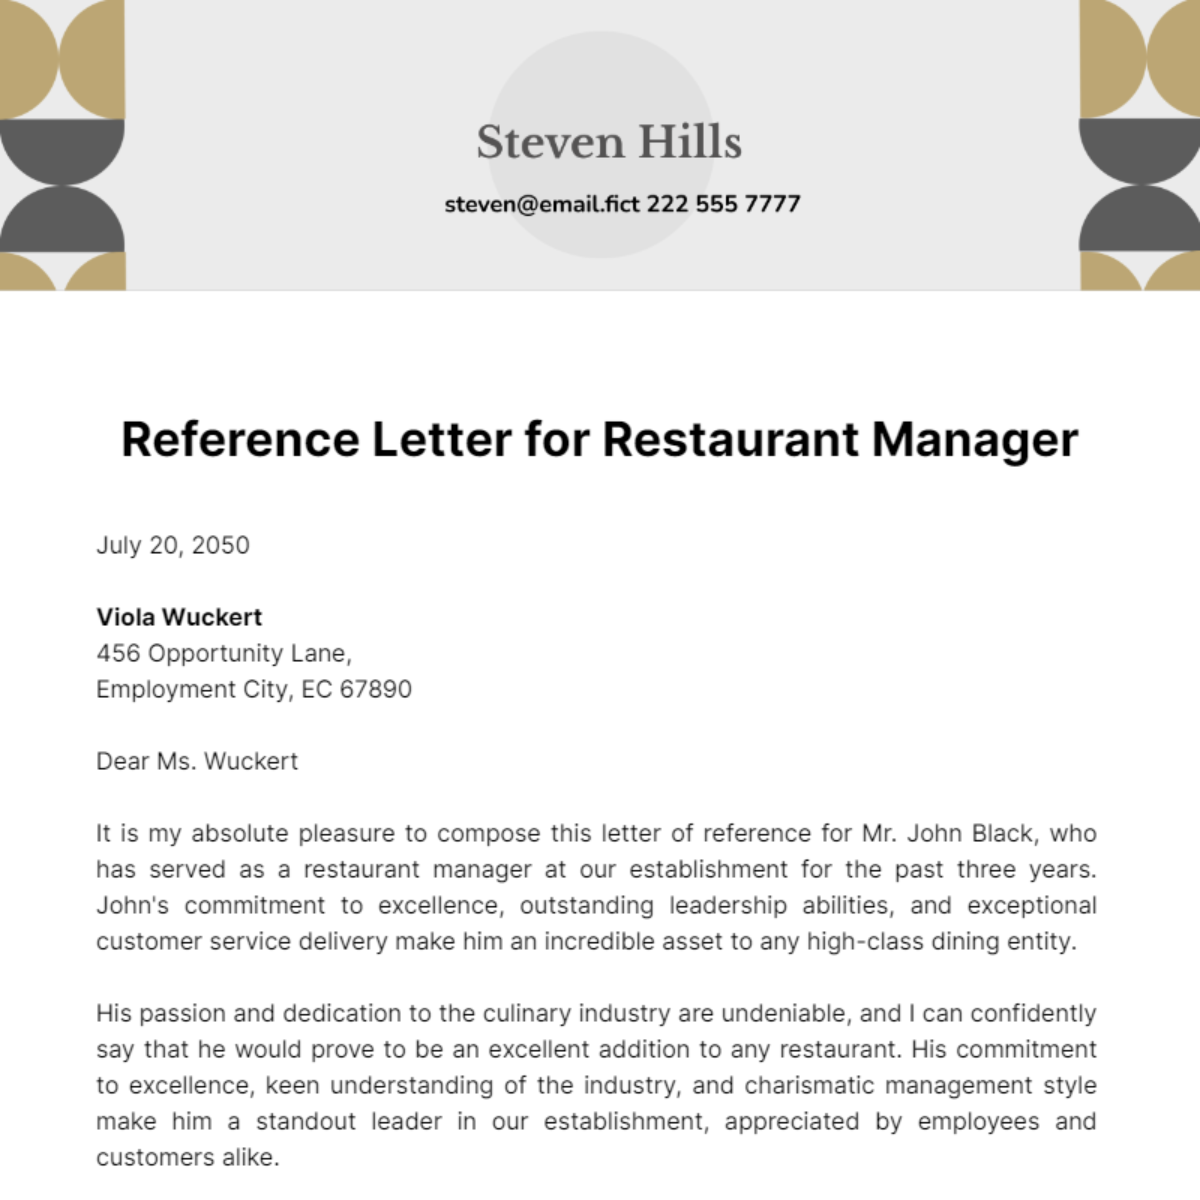 Reference Letter for Restaurant Manager Template